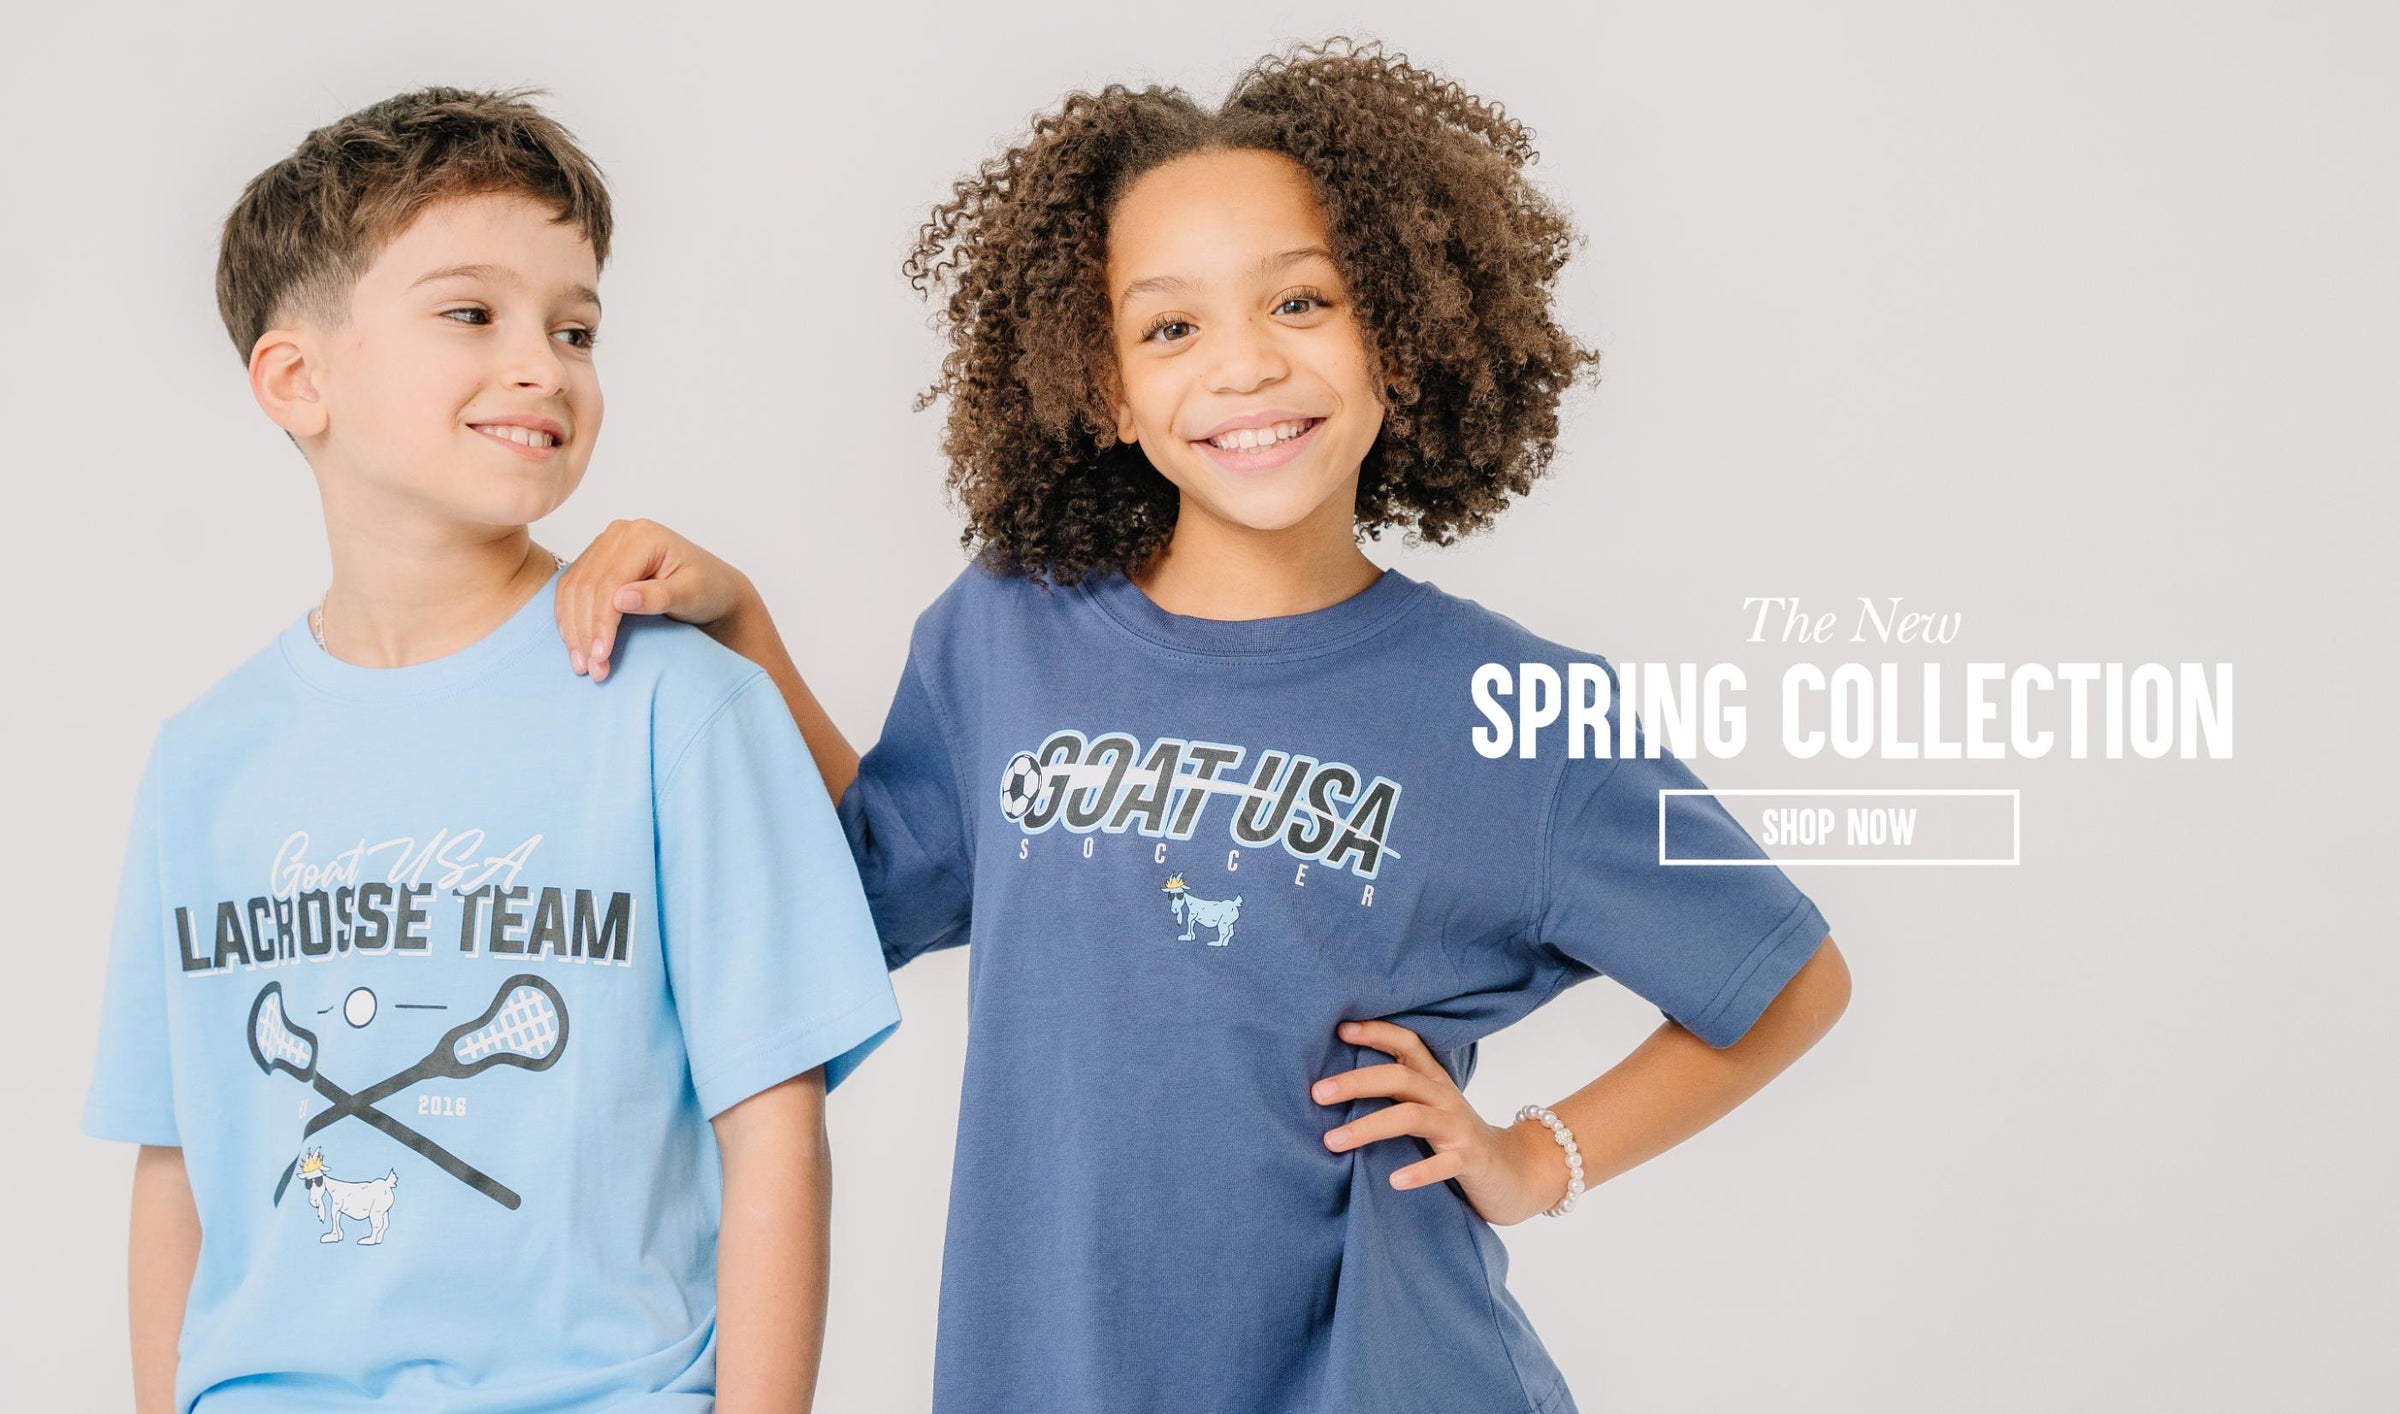 Boy and girl smiling next to text that reads "The New Spring Collection Shop Now"